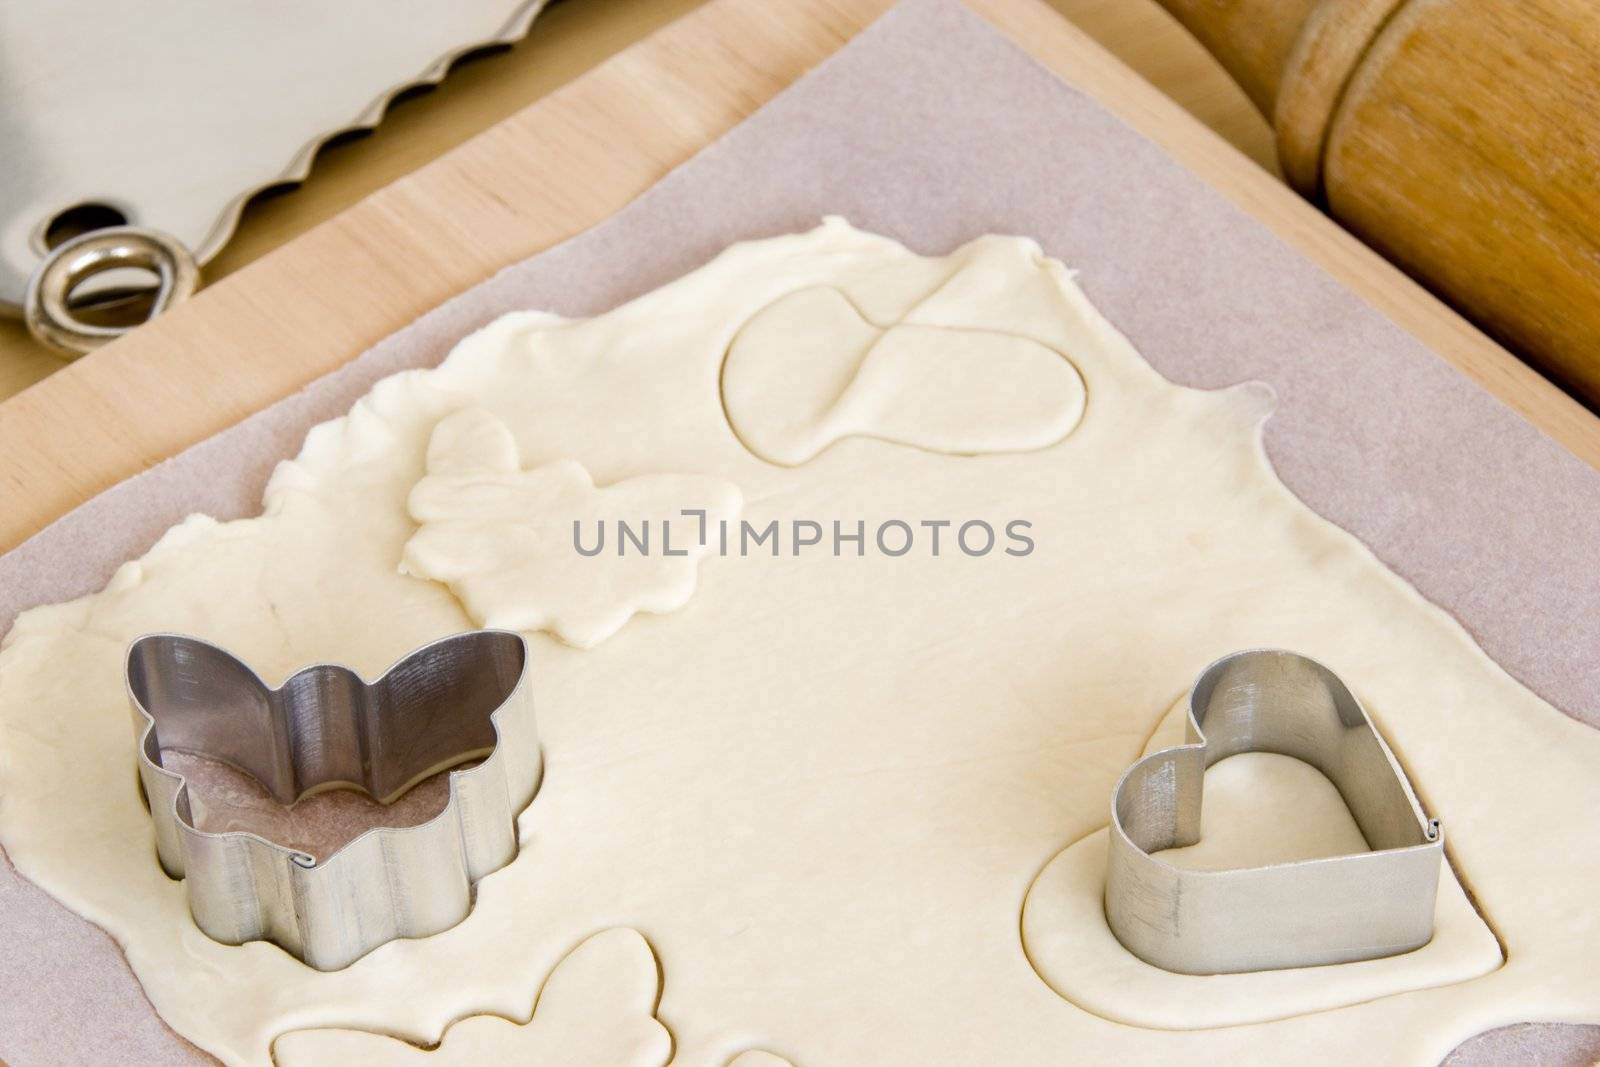 Image of cookie making with molds and pastry.